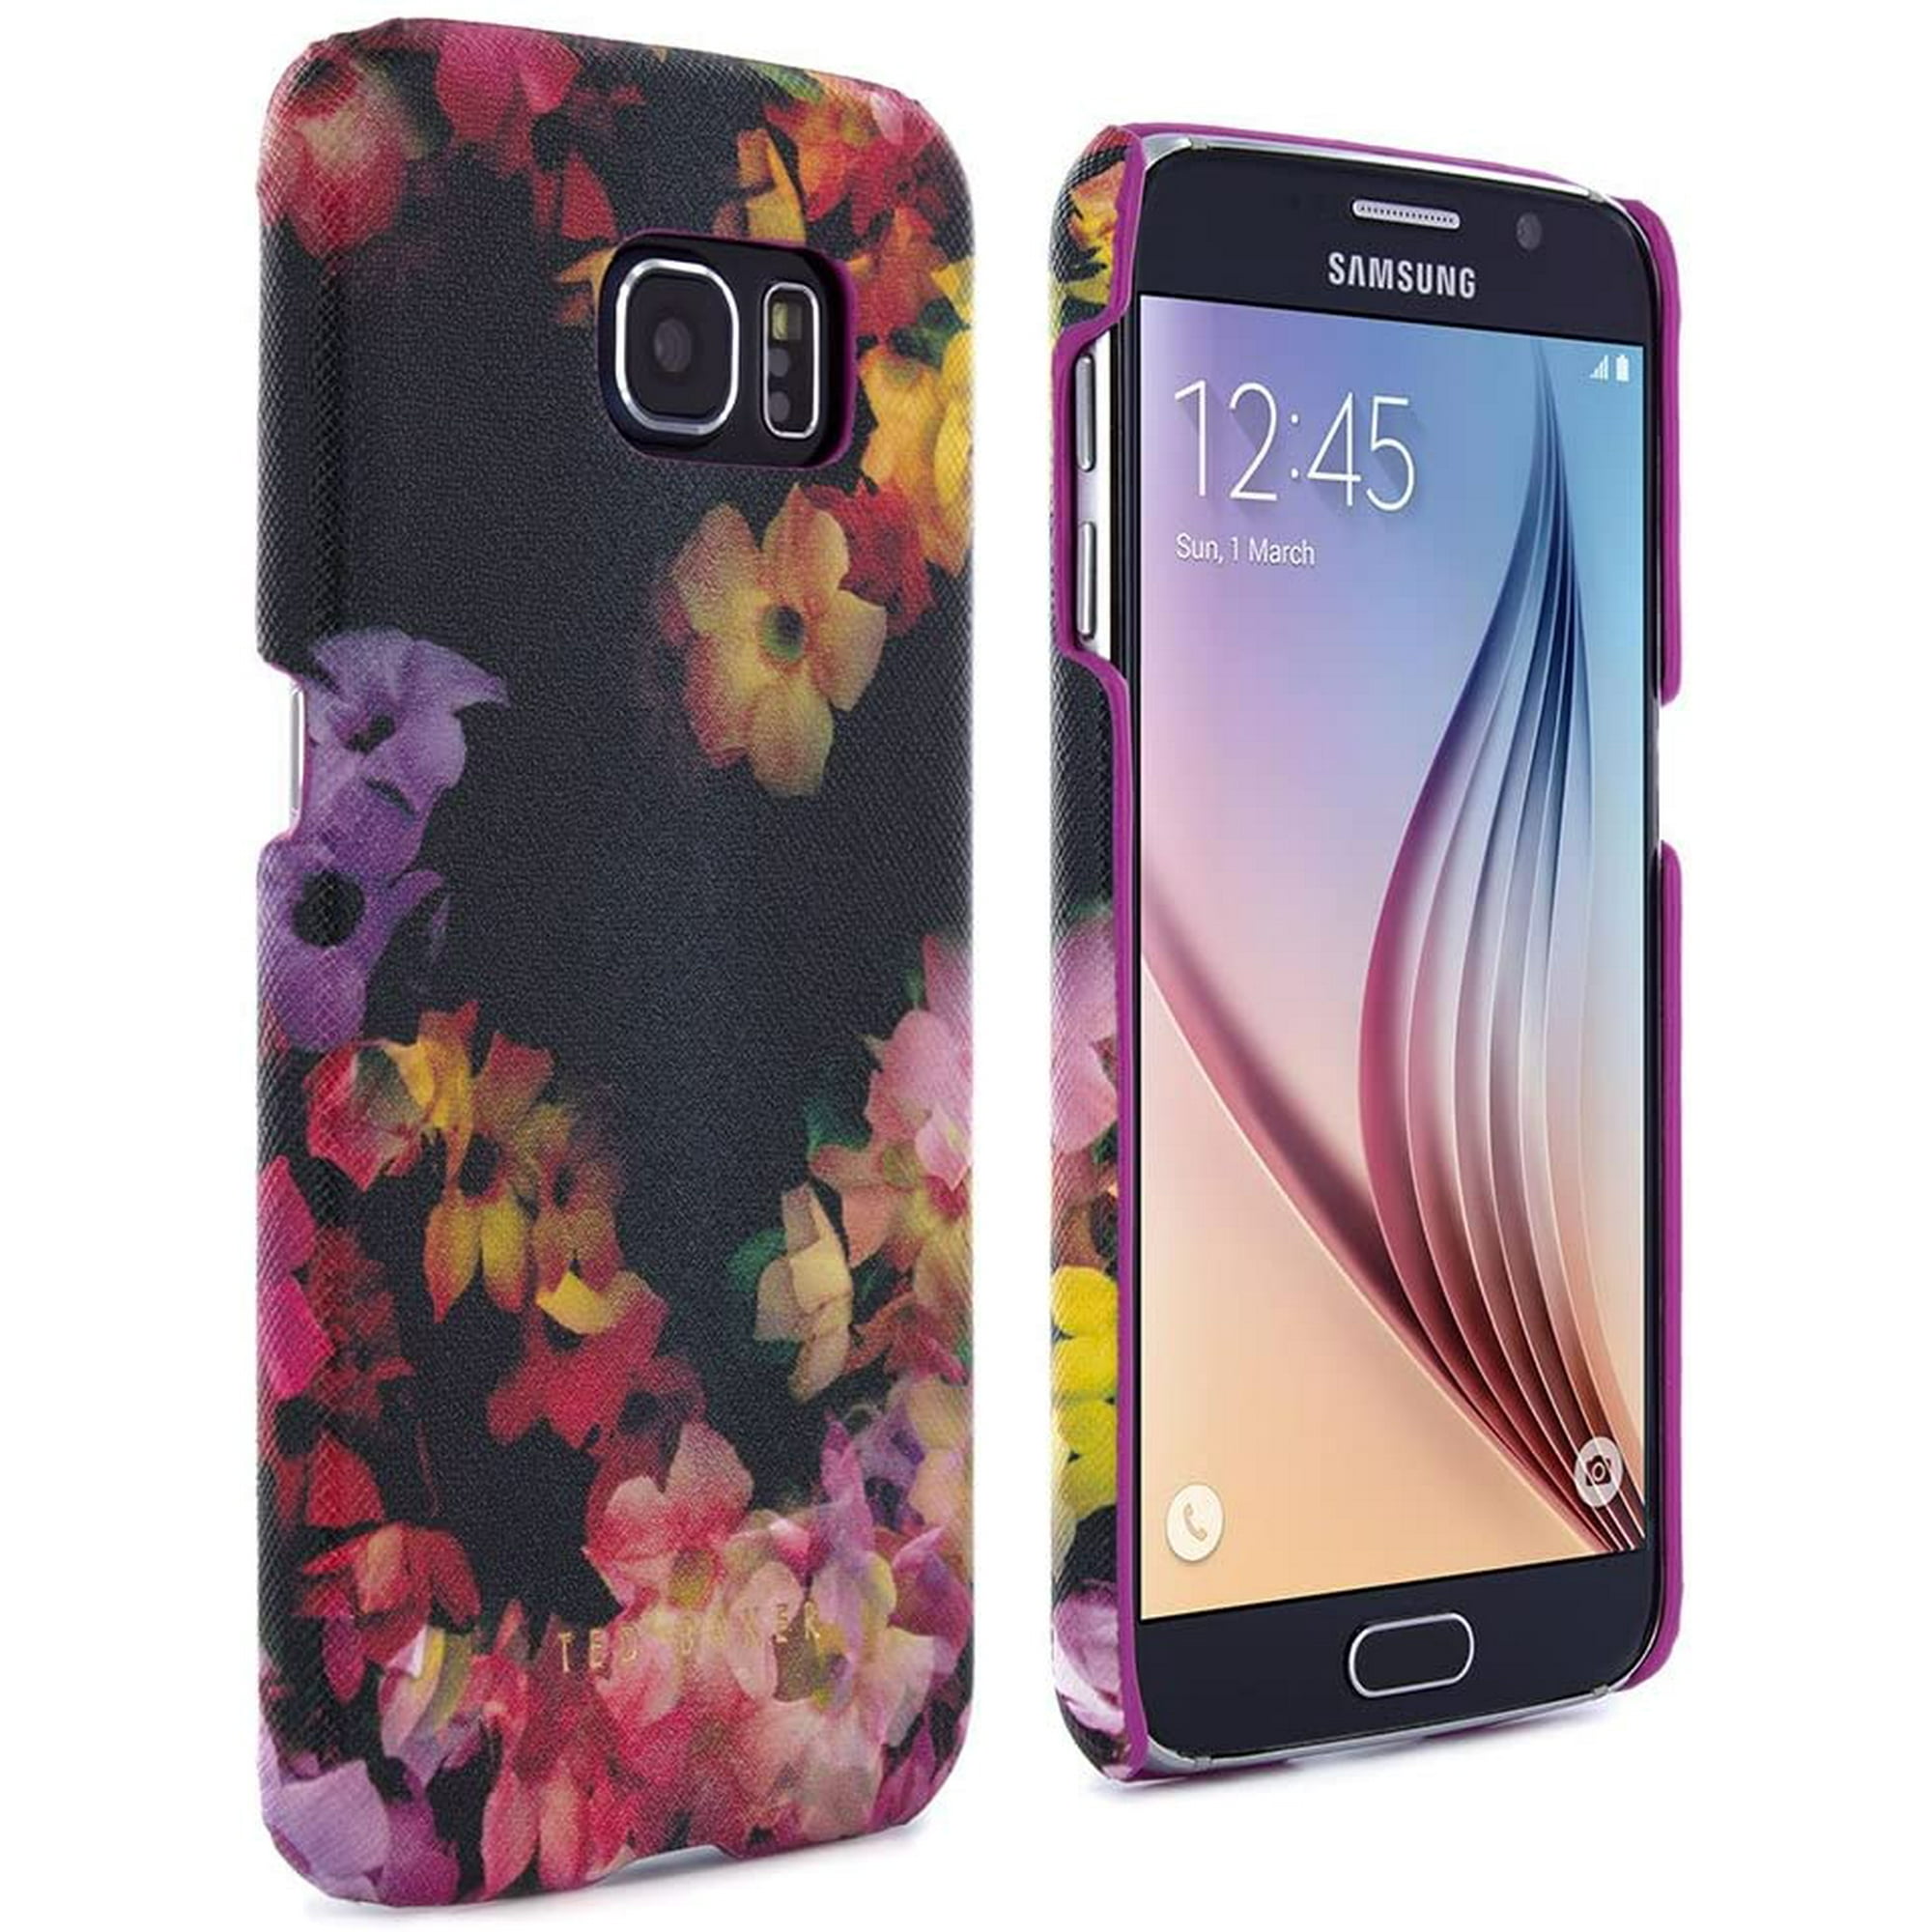 baas invoeren Systematisch Ted Baker SS15 Women's Collection Luxury Branded flower design case cover  for Galaxy S6 Original Ted branded case cover for Ga | Walmart Canada